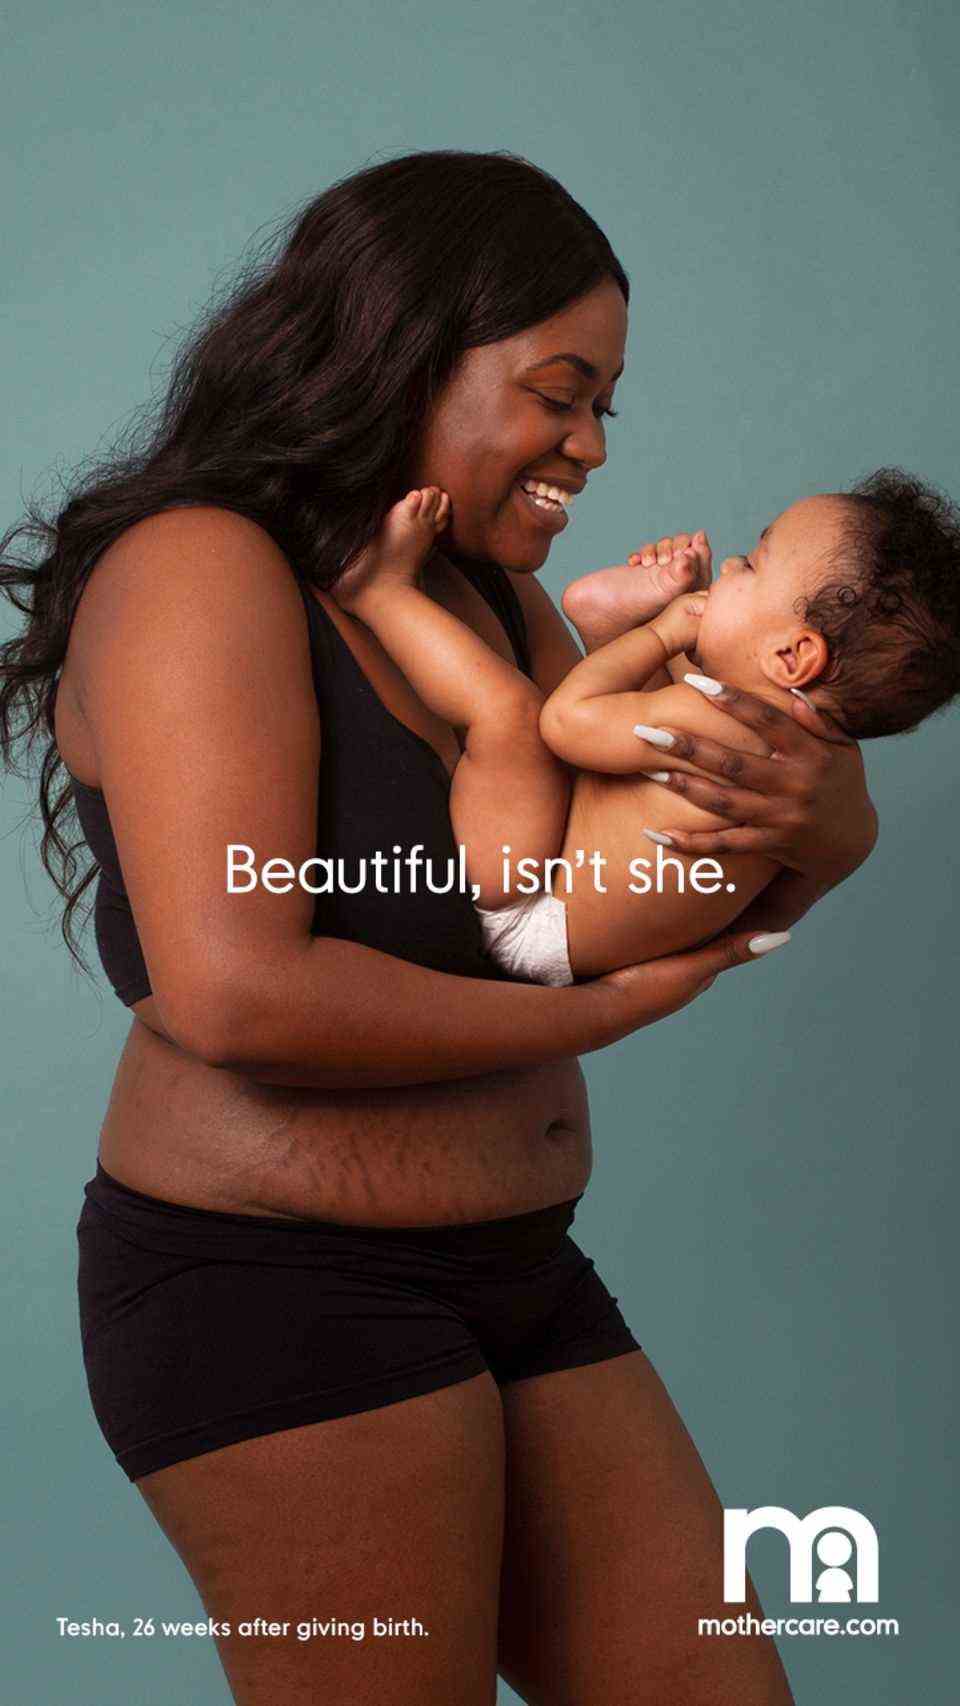 Who do the few stretch marks bother?  Mama Tesha happily presents her baby - and her body.